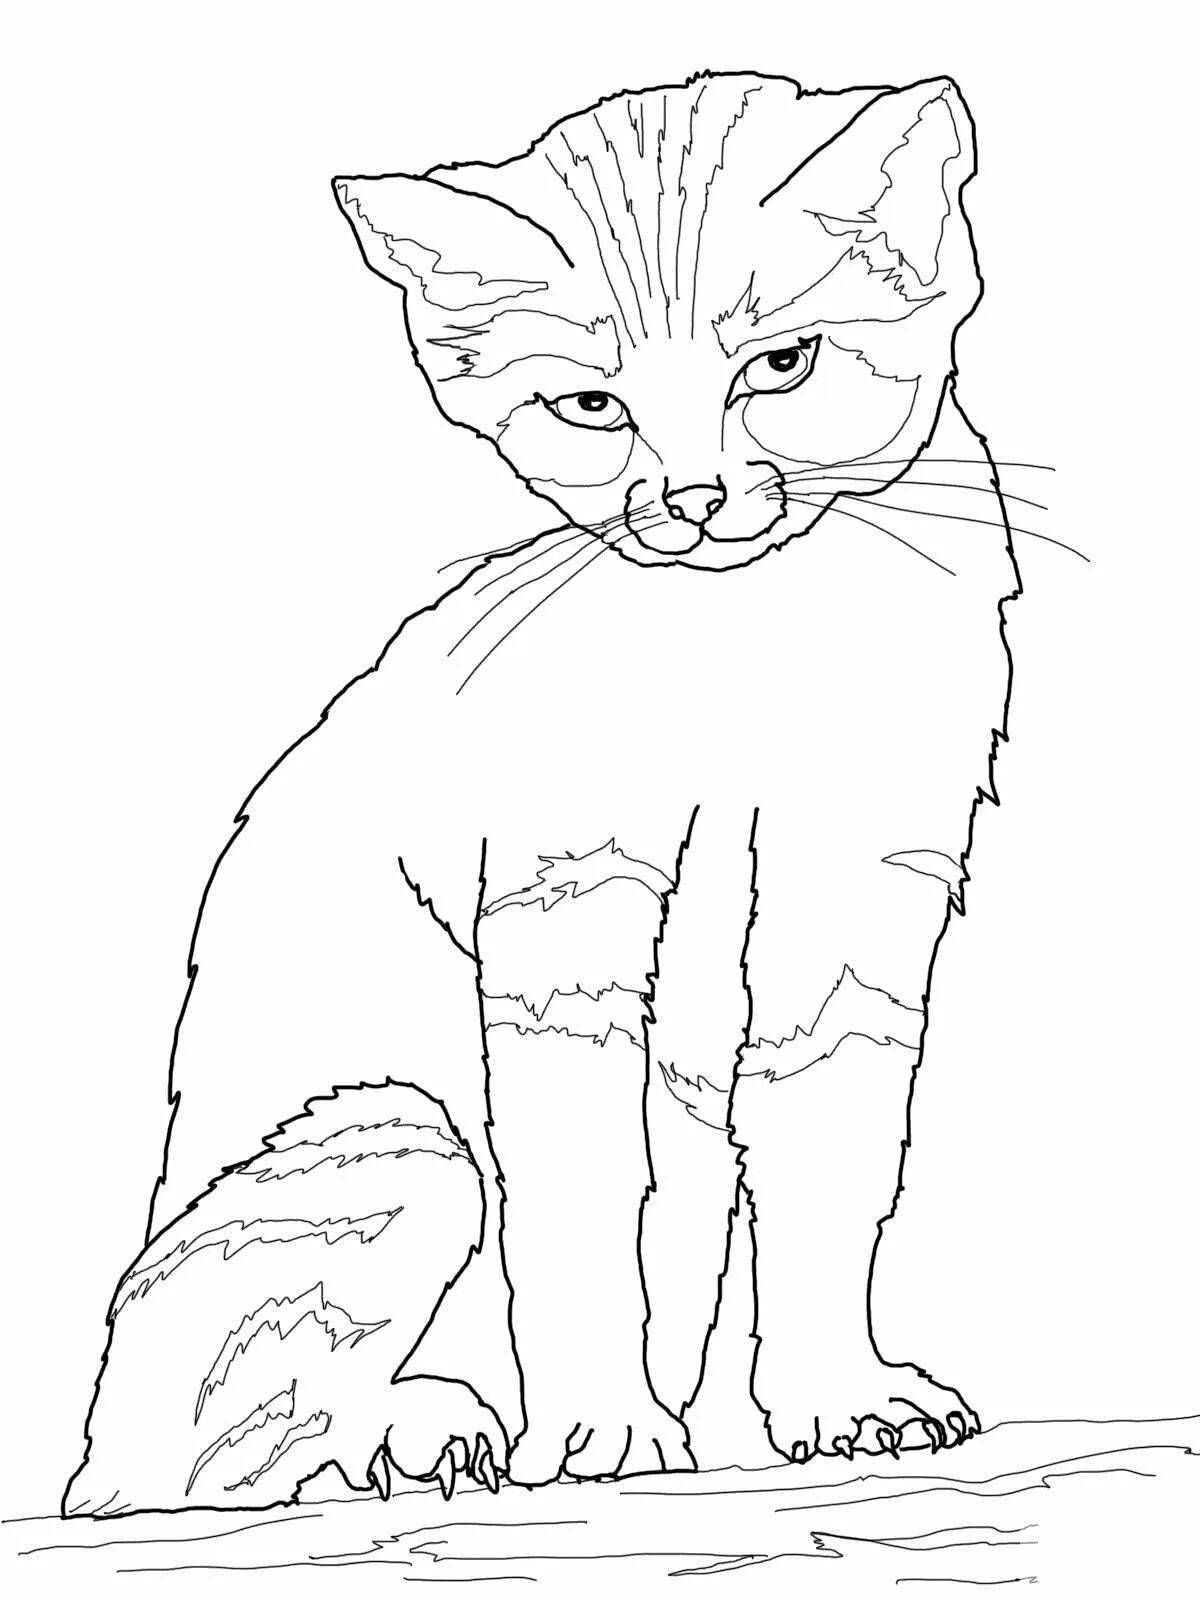 Coloring book inquisitive real cat